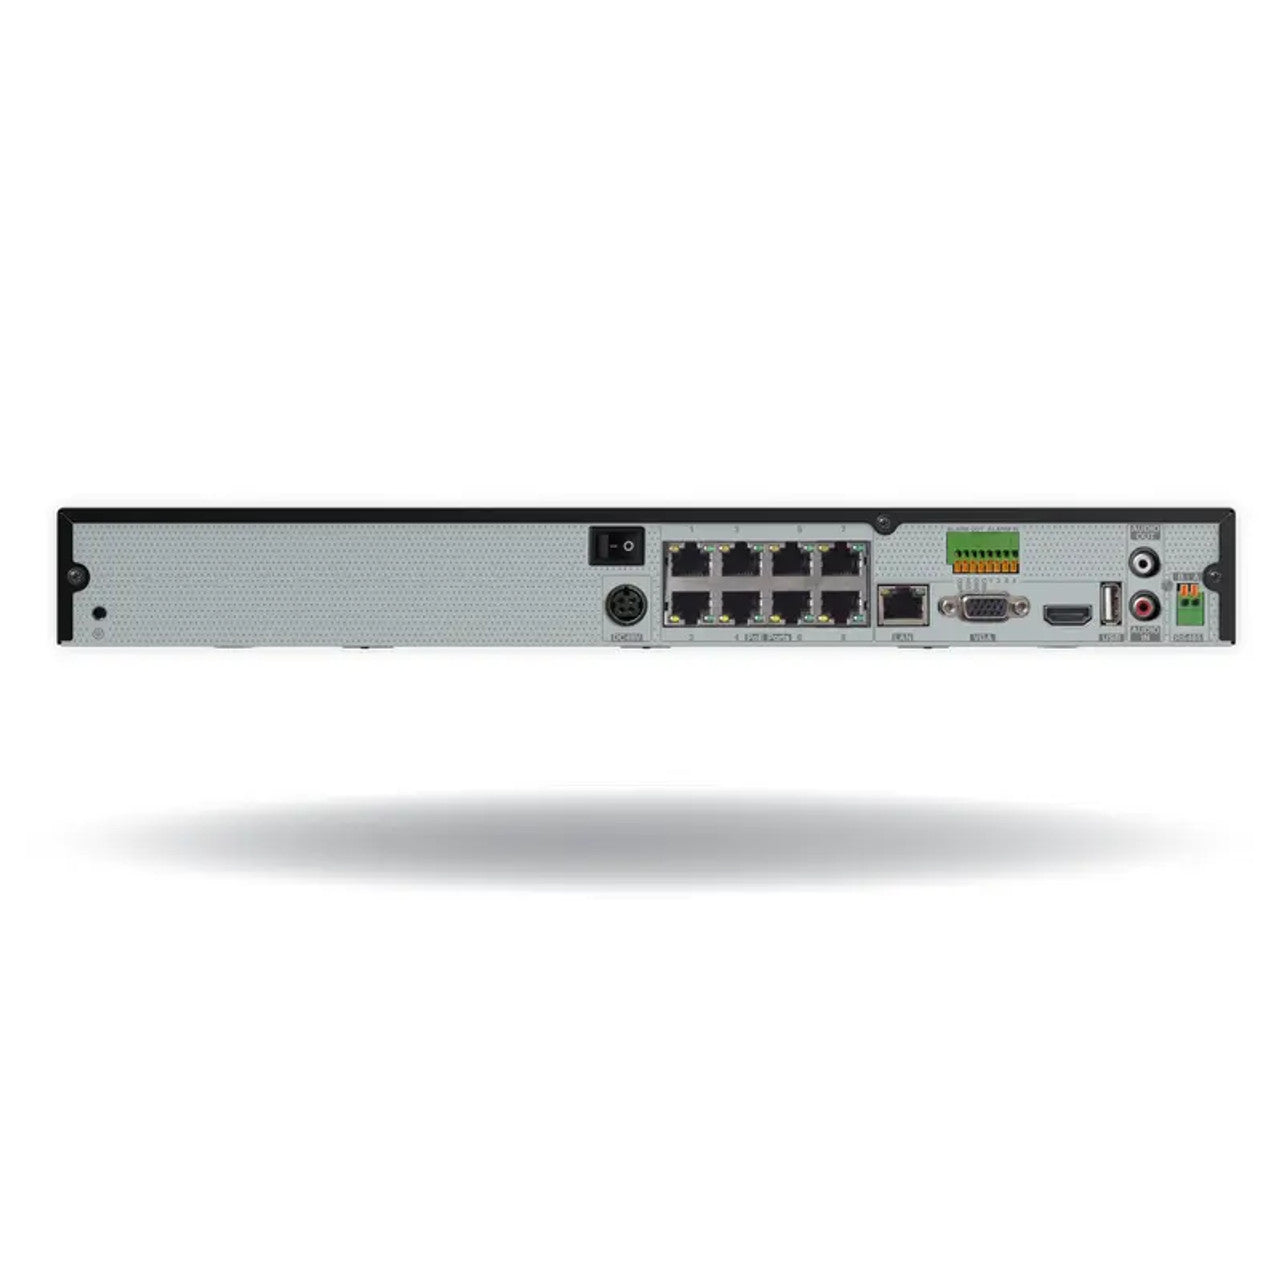 Digital Watchdog DW-VG4128P 8 Channel PoE NVR with 4 bonus channels, No Hard Drive Included, 12-Channel